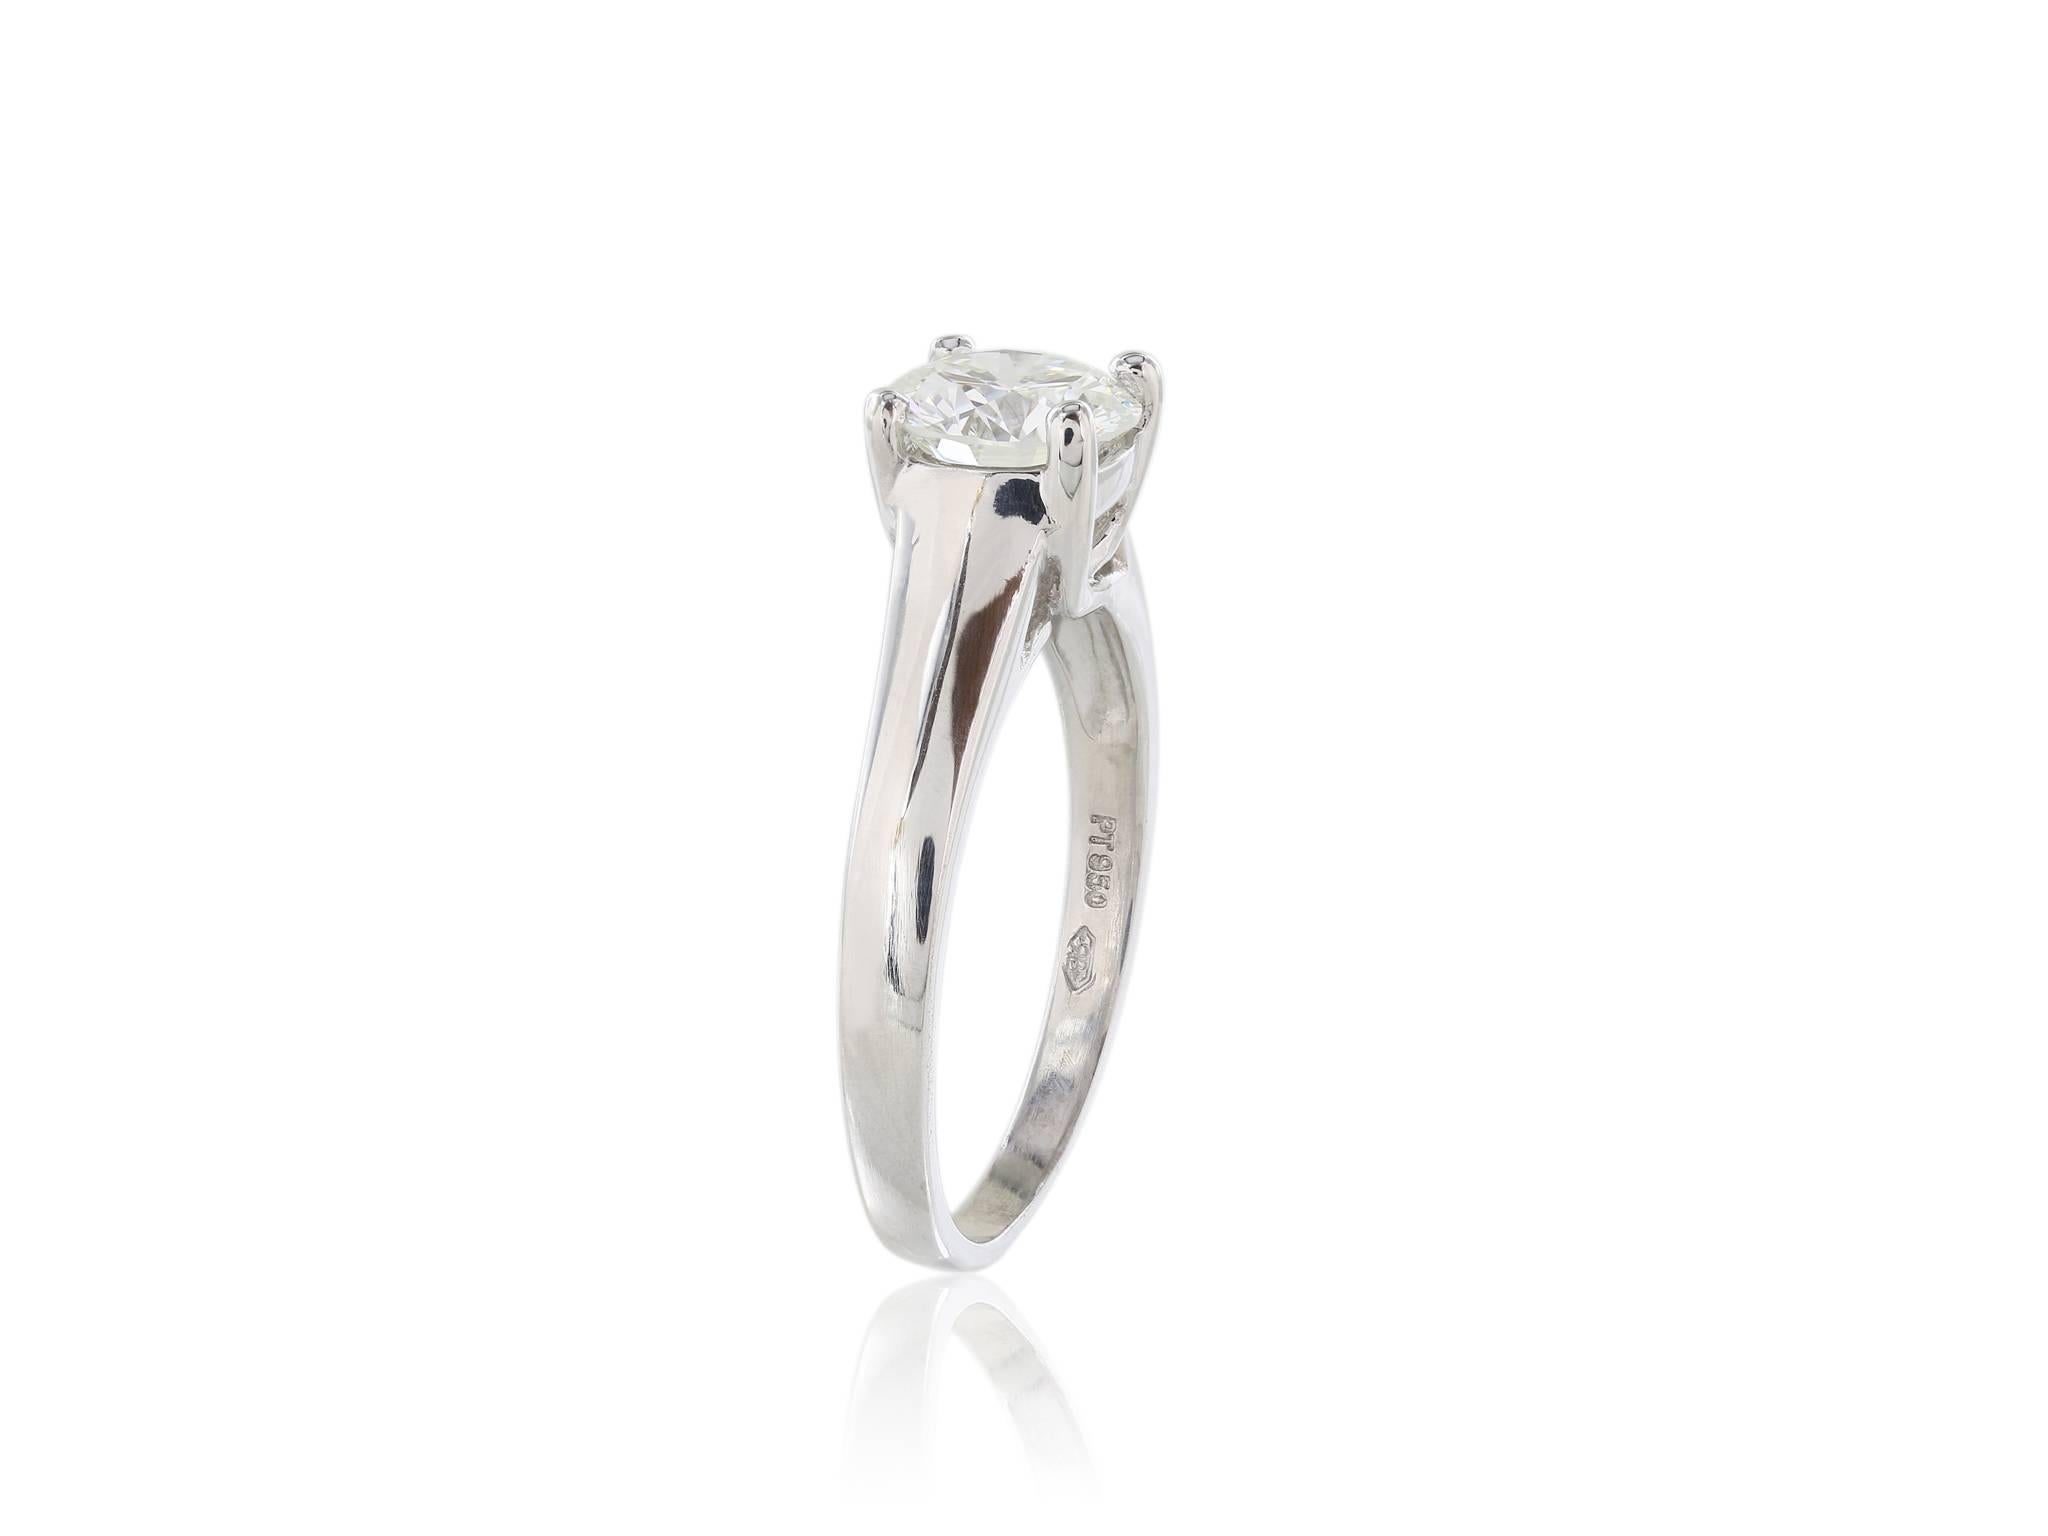 1.13 carat diamond platinum solitaire ring with a color and clarity rating of G/VVS1 .  The diamond has a GIA triple excellence rating for cut, polish and symmetry.